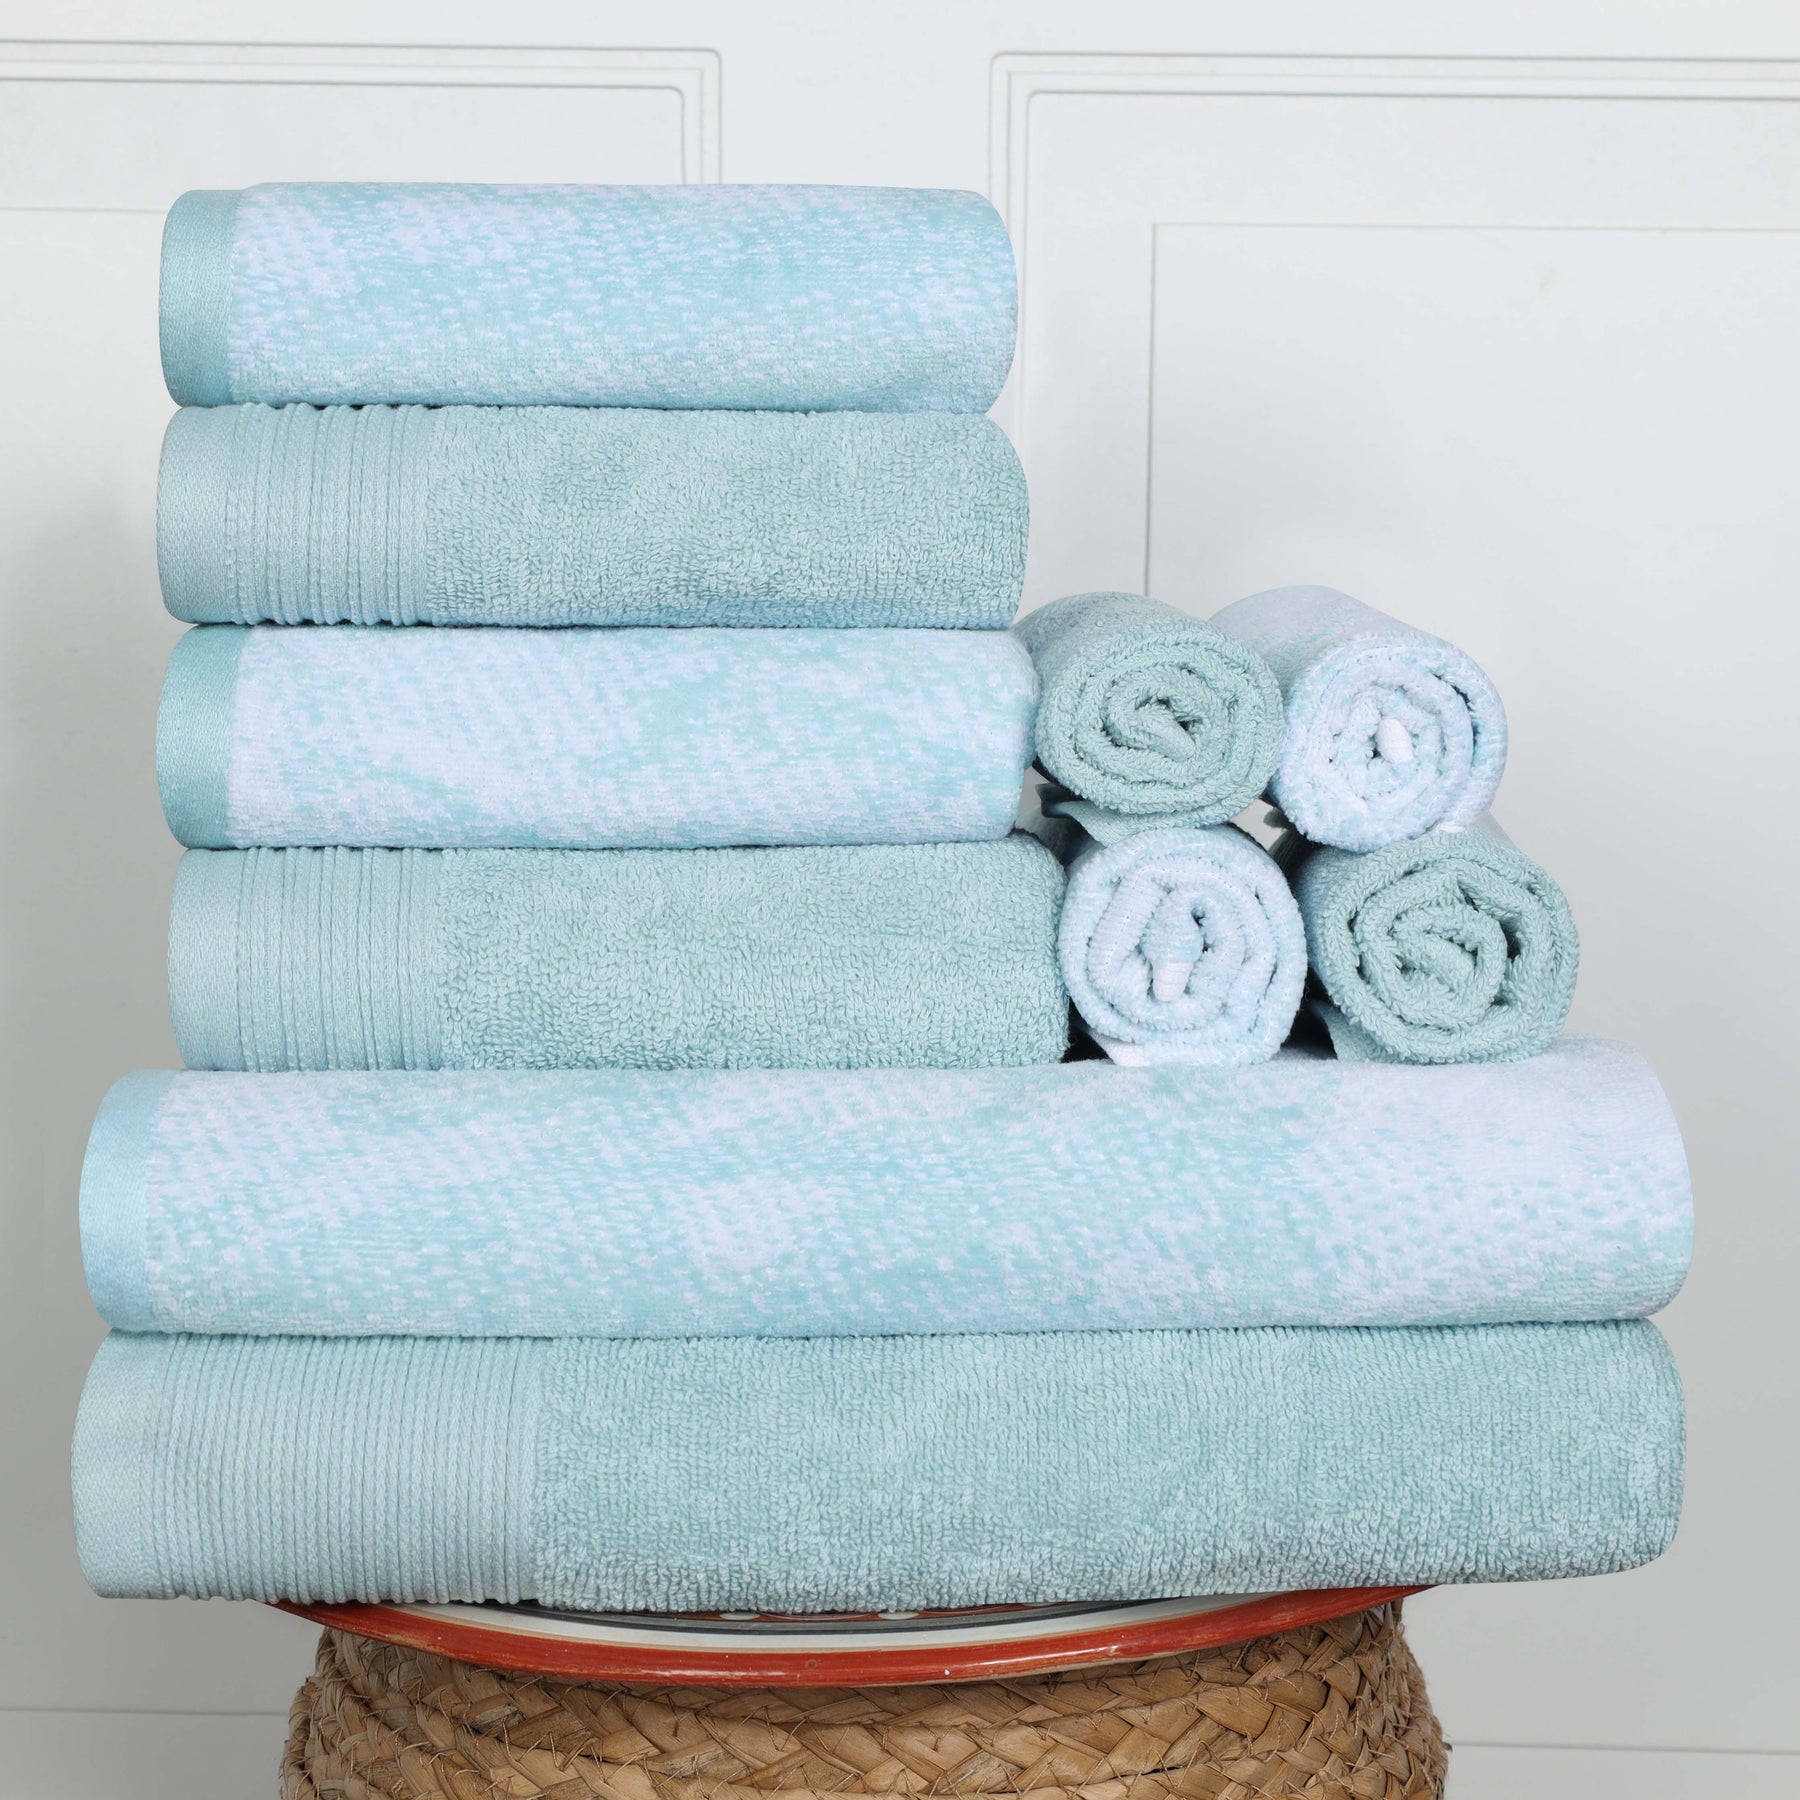 Cotton Marble and Solid Quick Dry 10 Piece Assorted Bathroom Towel Set - Teal